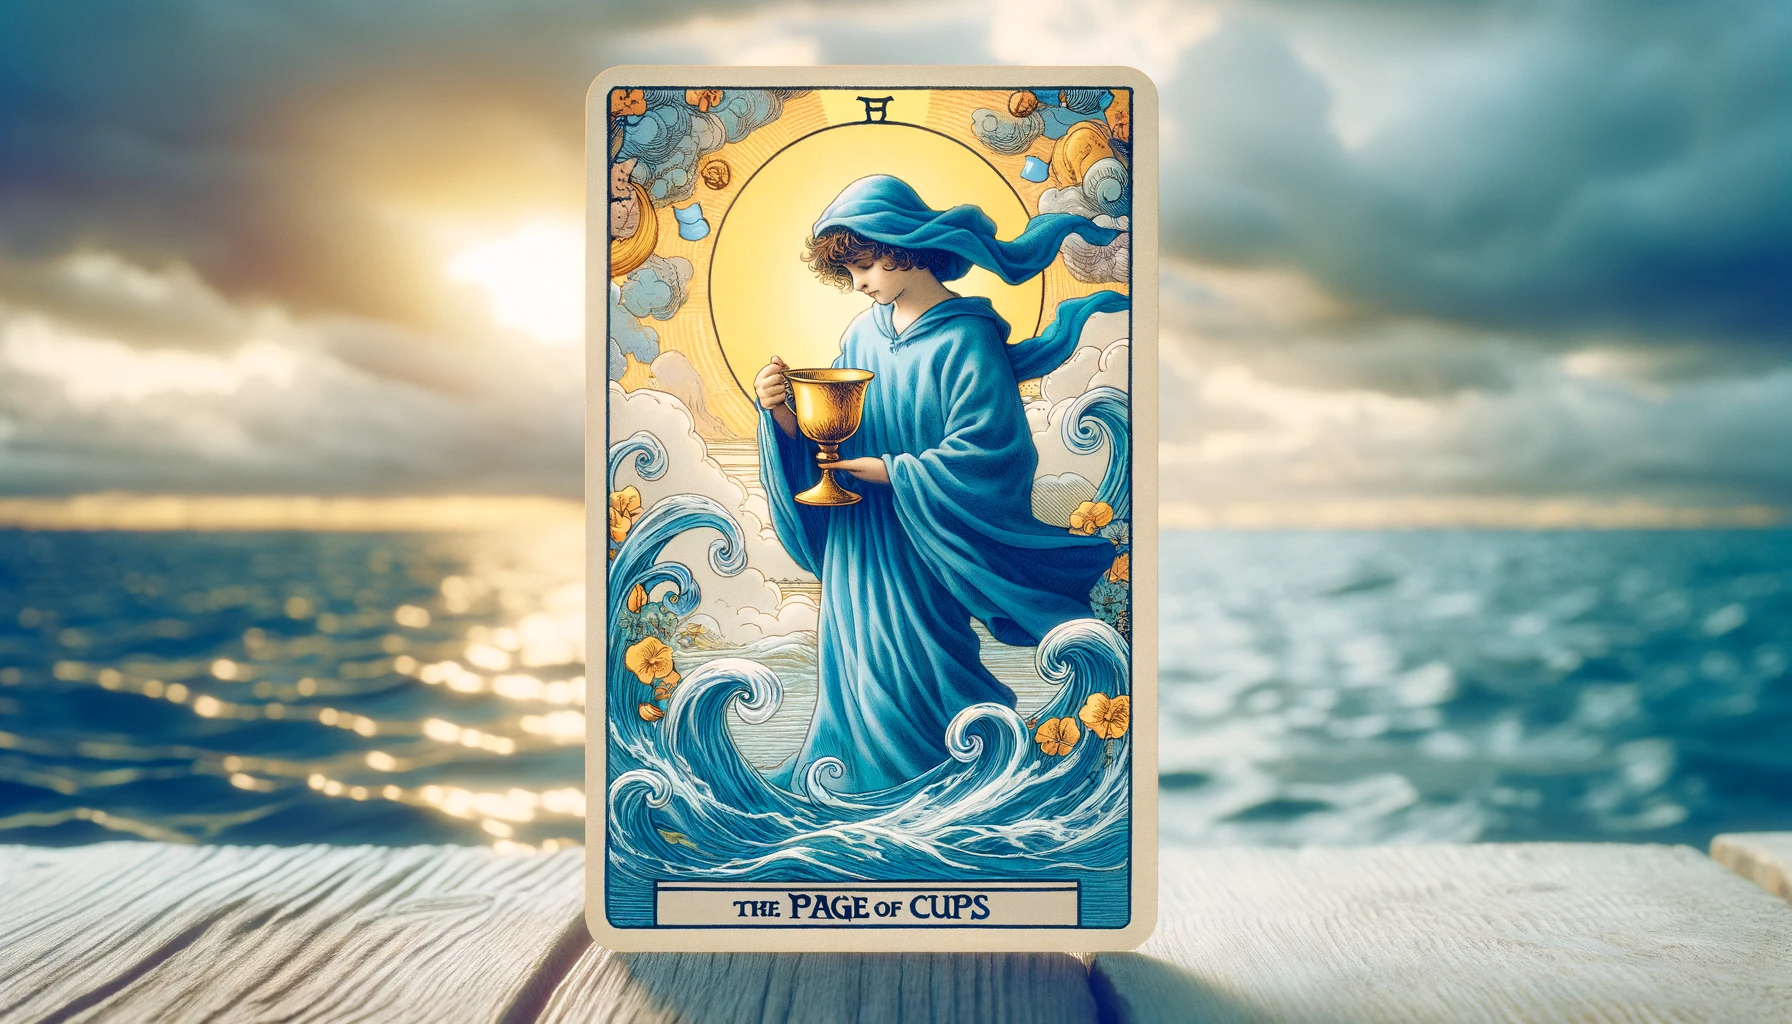 An image capturing the whimsical essence of the Page of Cups tarot card a young figure in flowing blue robes holding a golden cup standing on the e